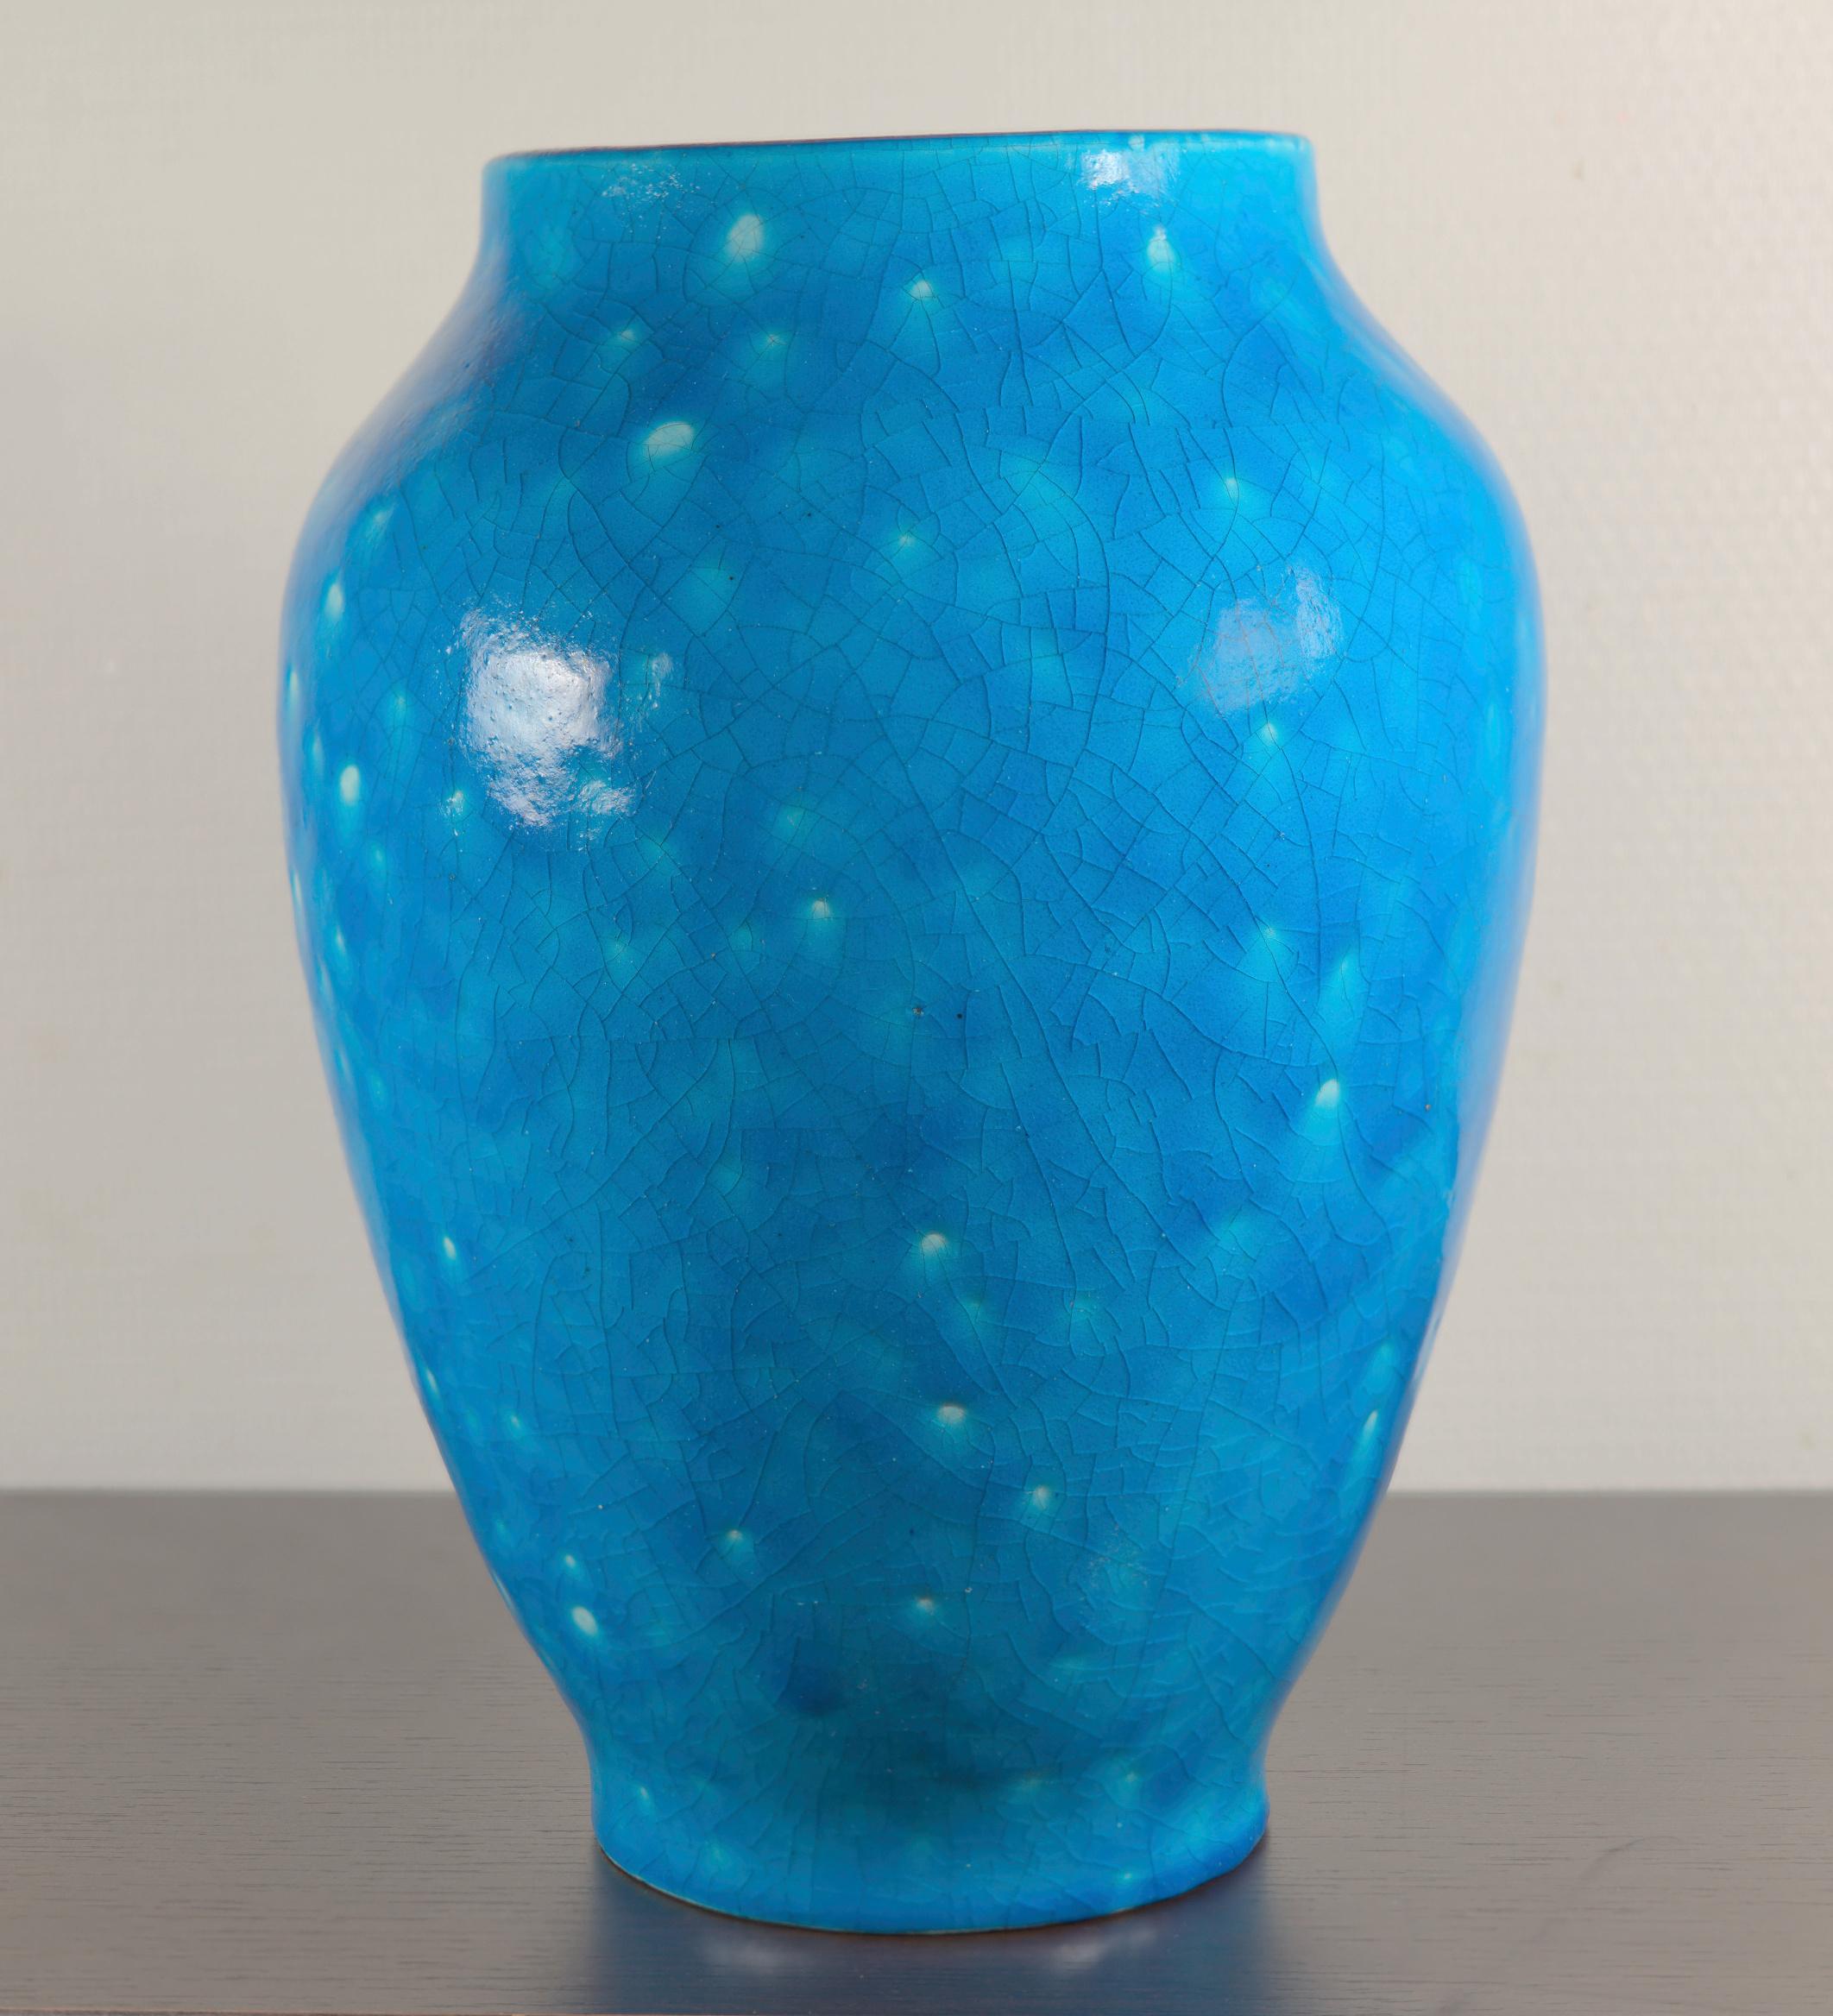 This beautiful baluster-shaped vase features the vivid hypnotic Egyptian blue (which some call 